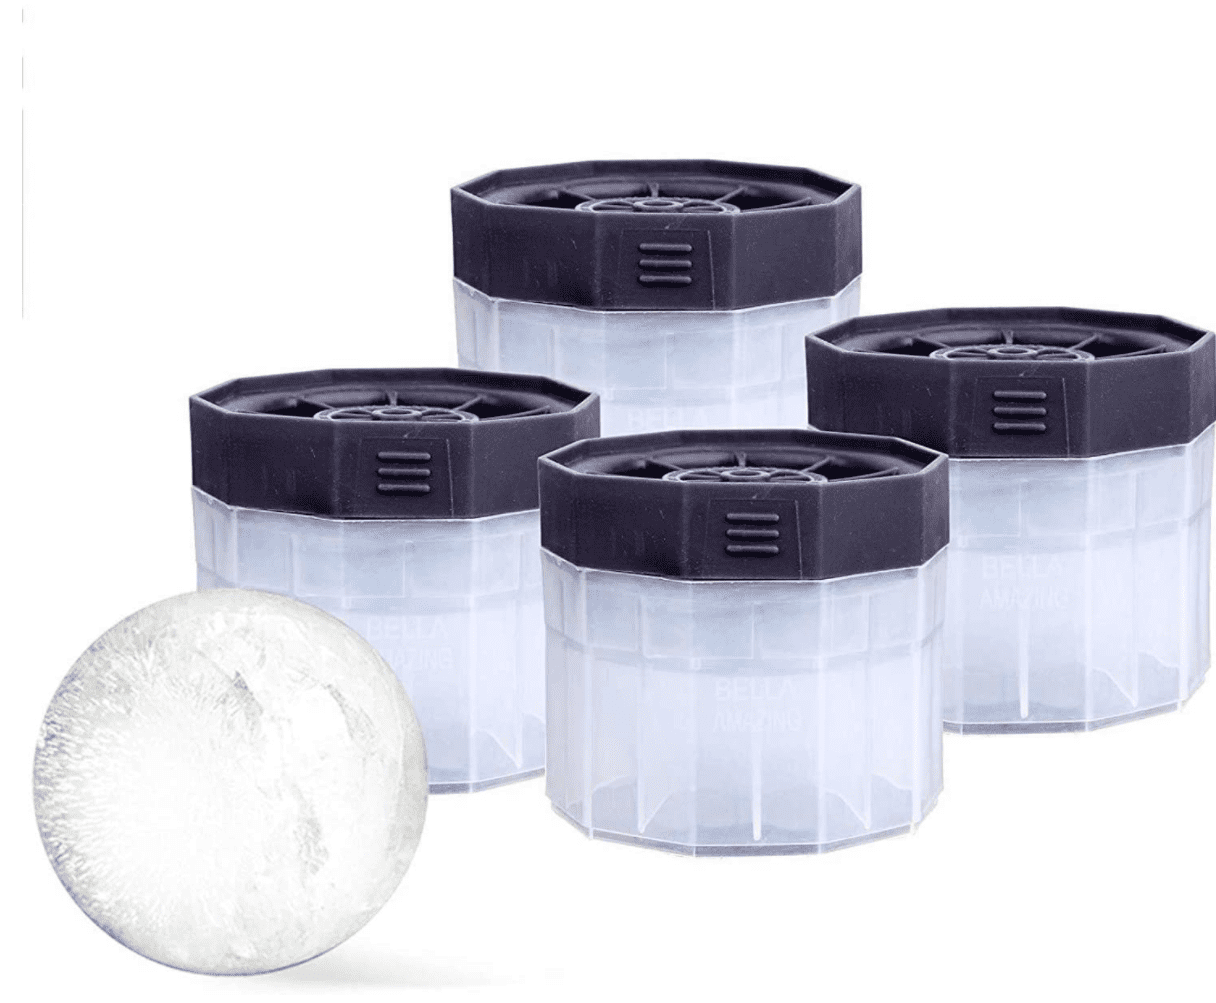 LORSIA Ice Ball Molds, Set of 4, Slow-Melting Stackable Ice Cube Maker, 2.5  Inch big Ice Spheres for Whiskey Cocktails Juice Beverages Bourbon